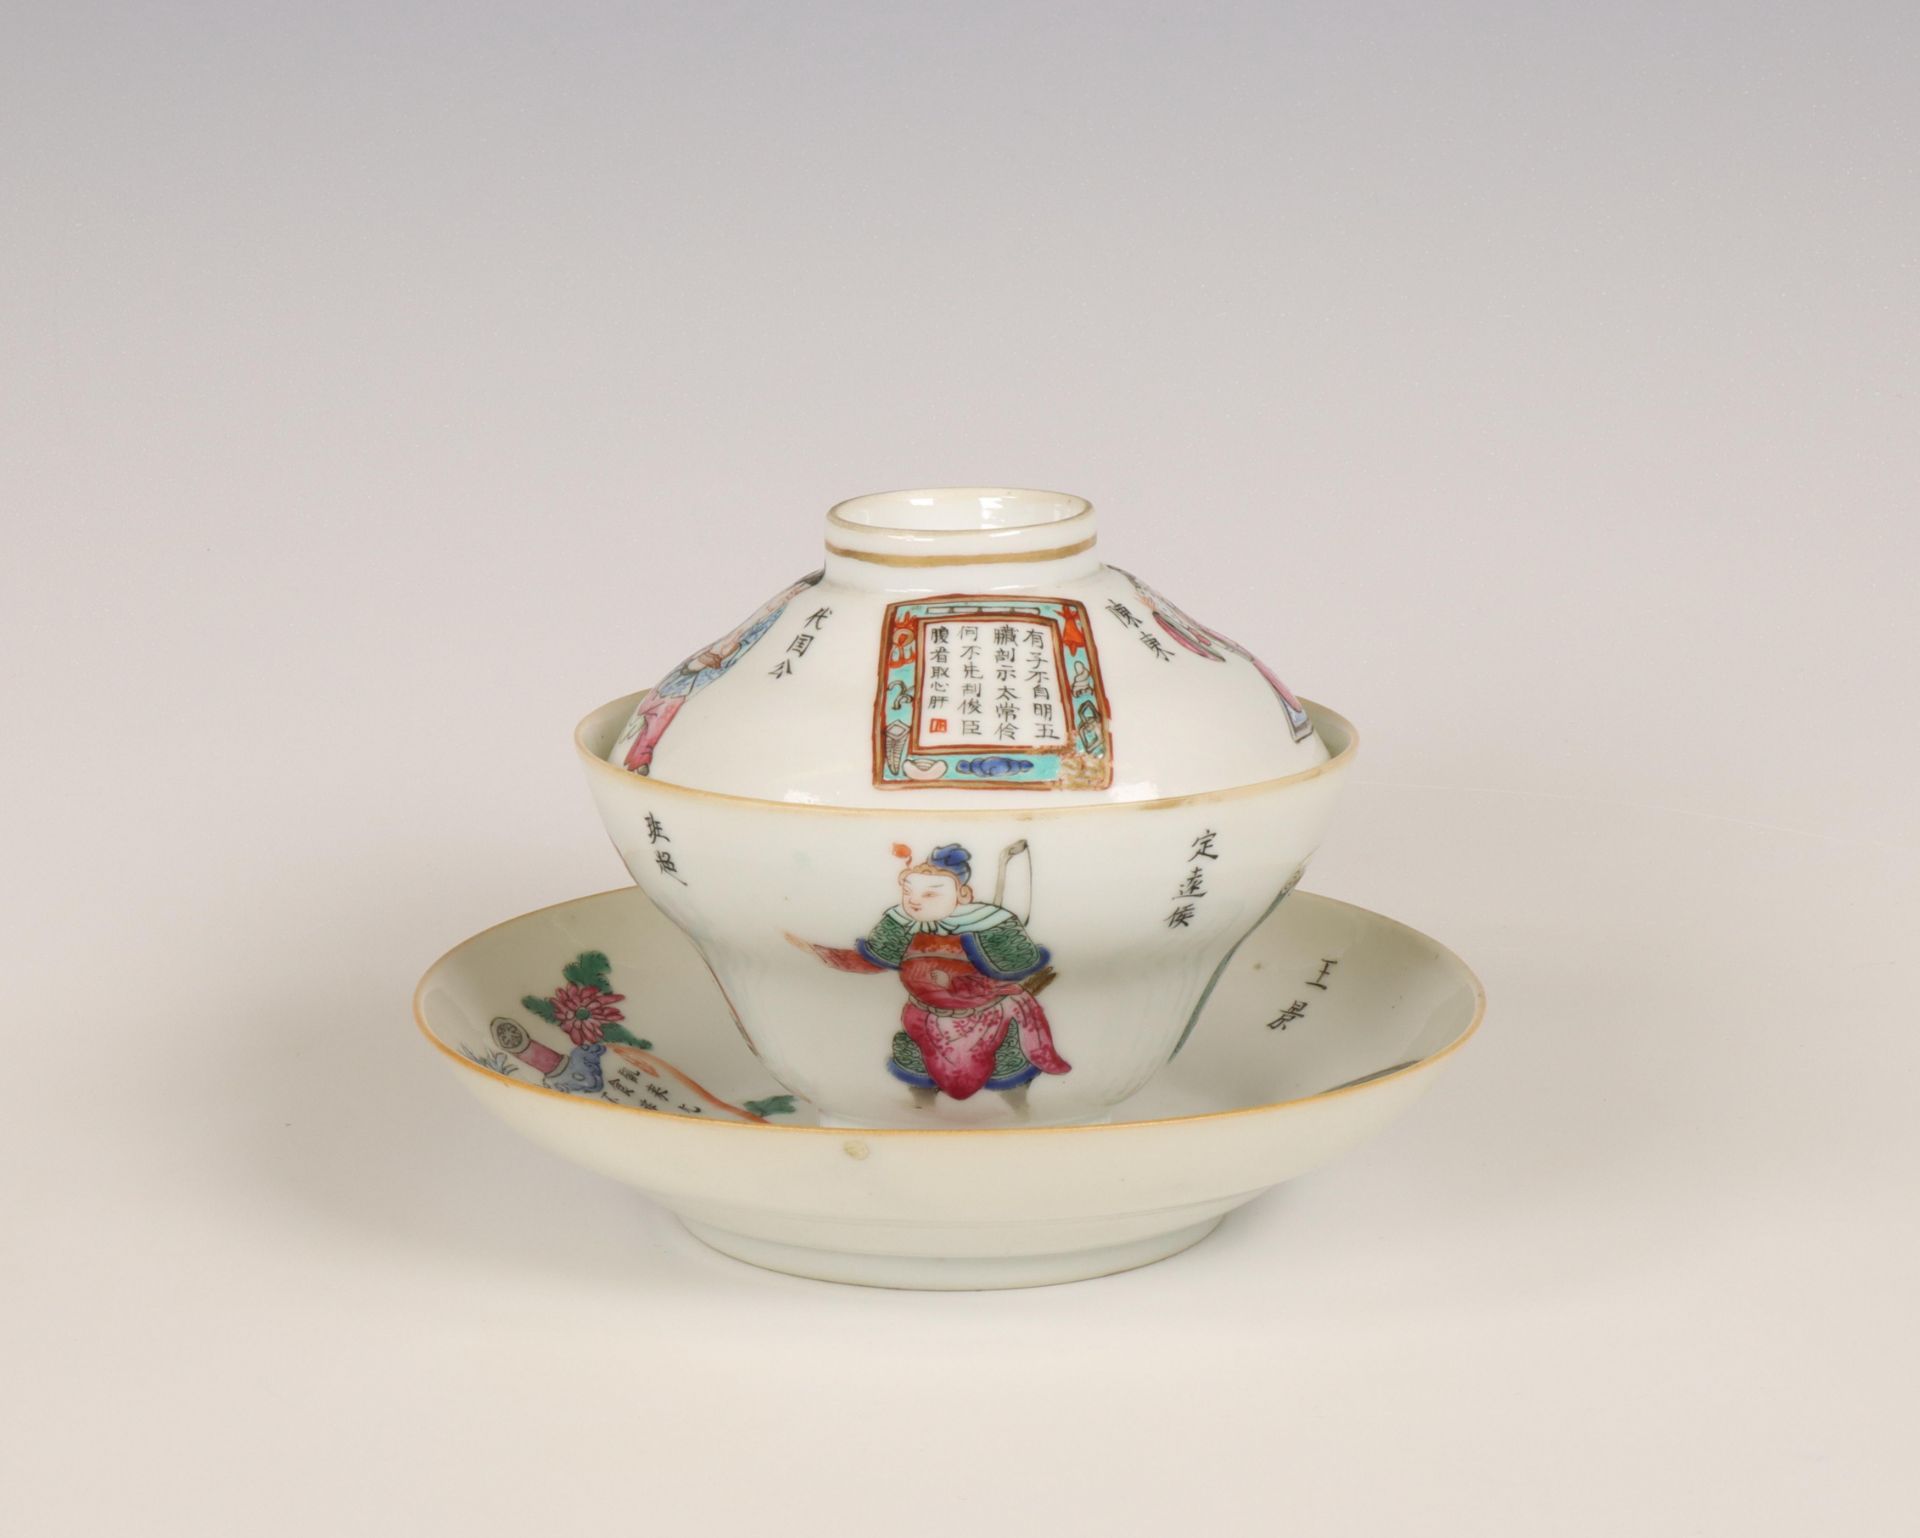 China, famille rose porcelain 'Wu Shuang Pu' ogee-form cup, saucer and cover, 19th century, - Image 2 of 5